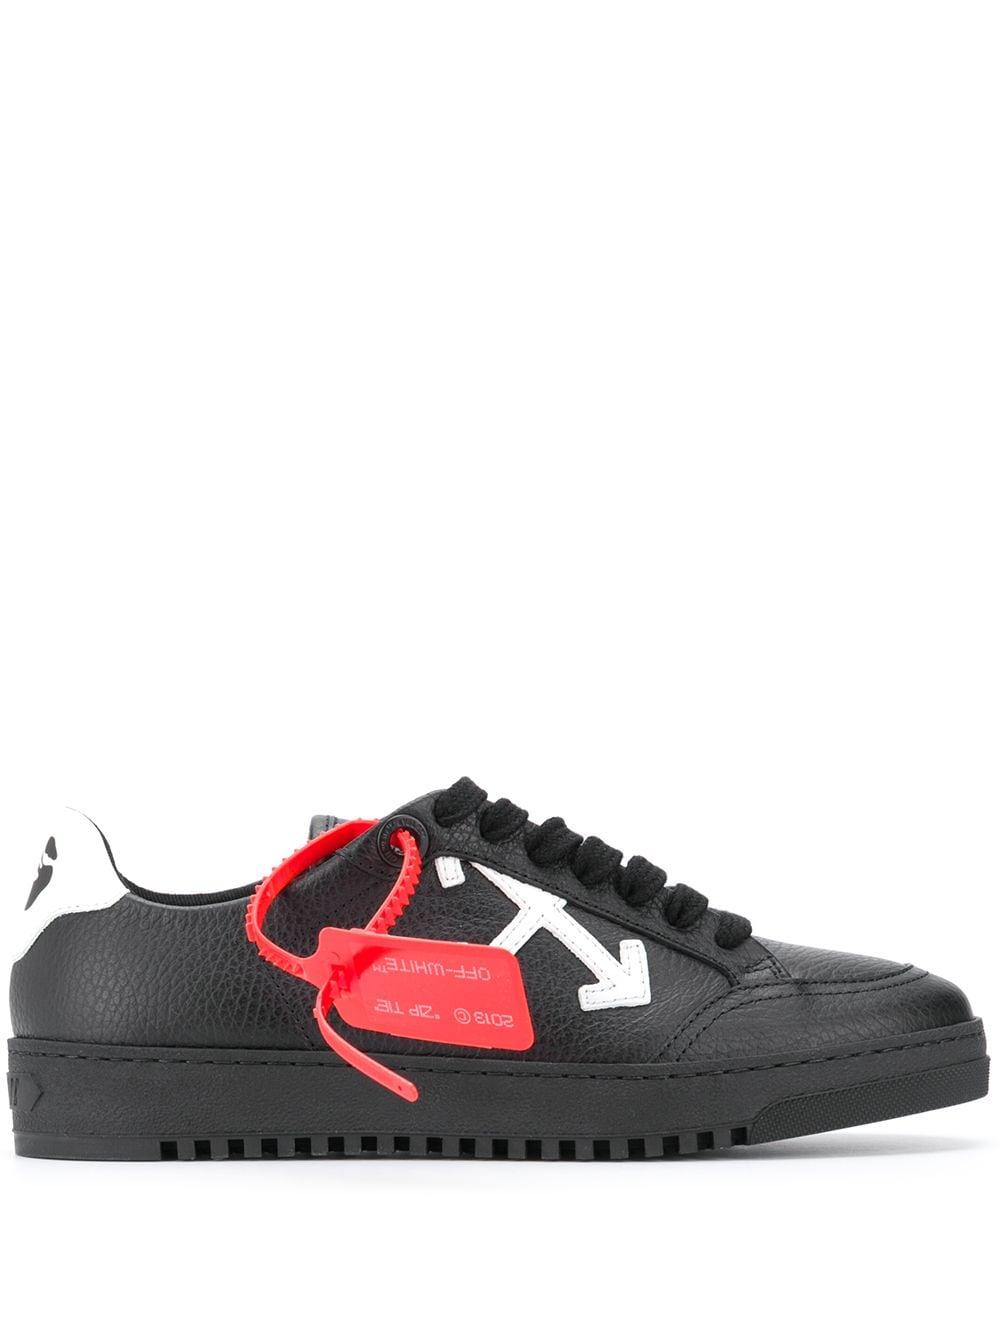 Off-White c/o Virgil Abloh Arrows 2.0 Low Top Leather Sneakers in 